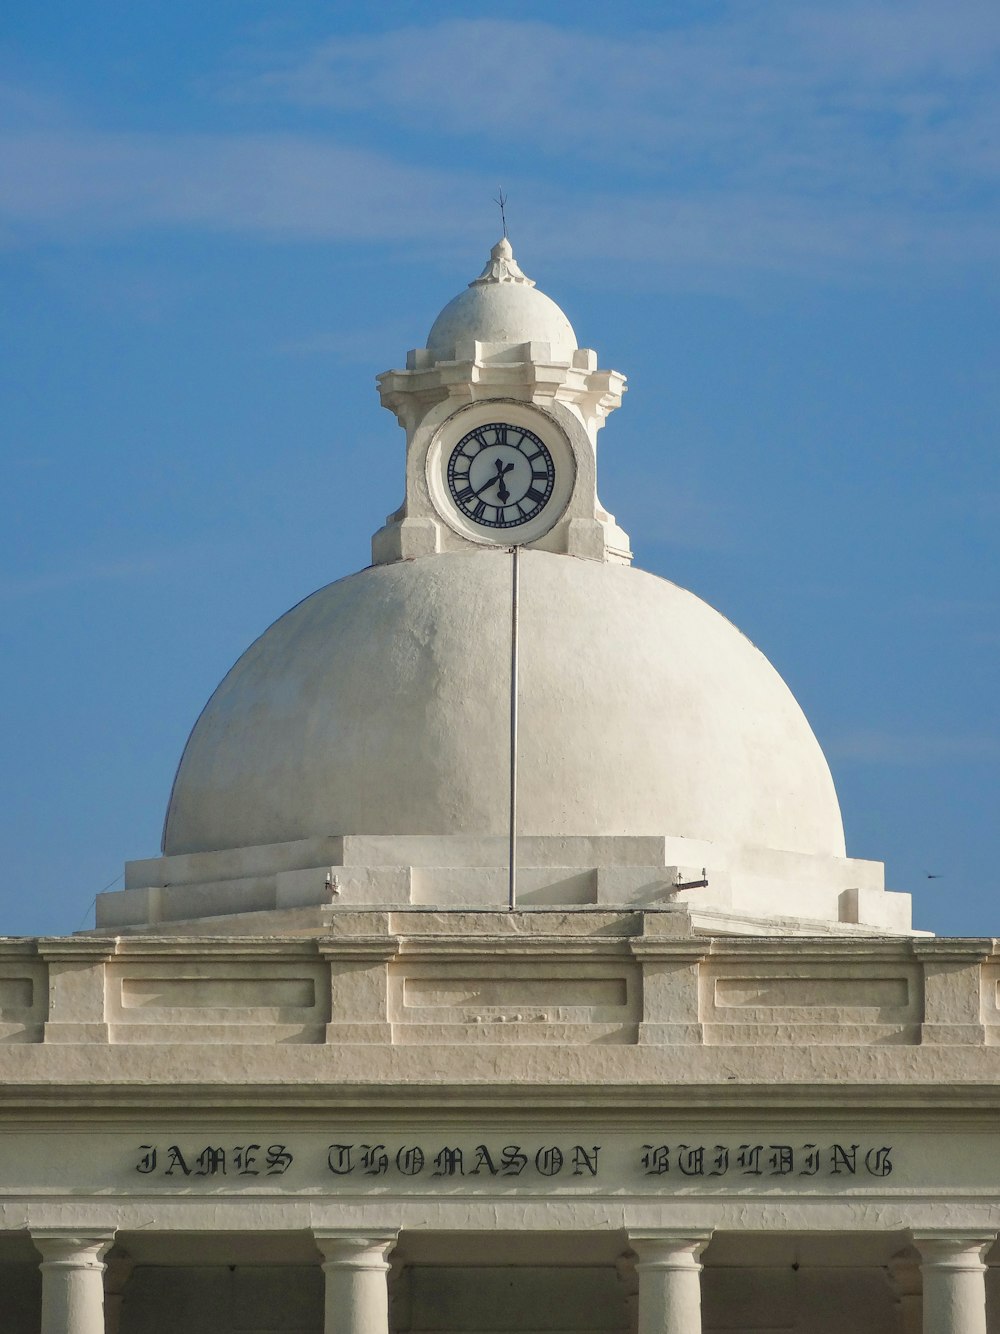 a large white dome with a clock on top